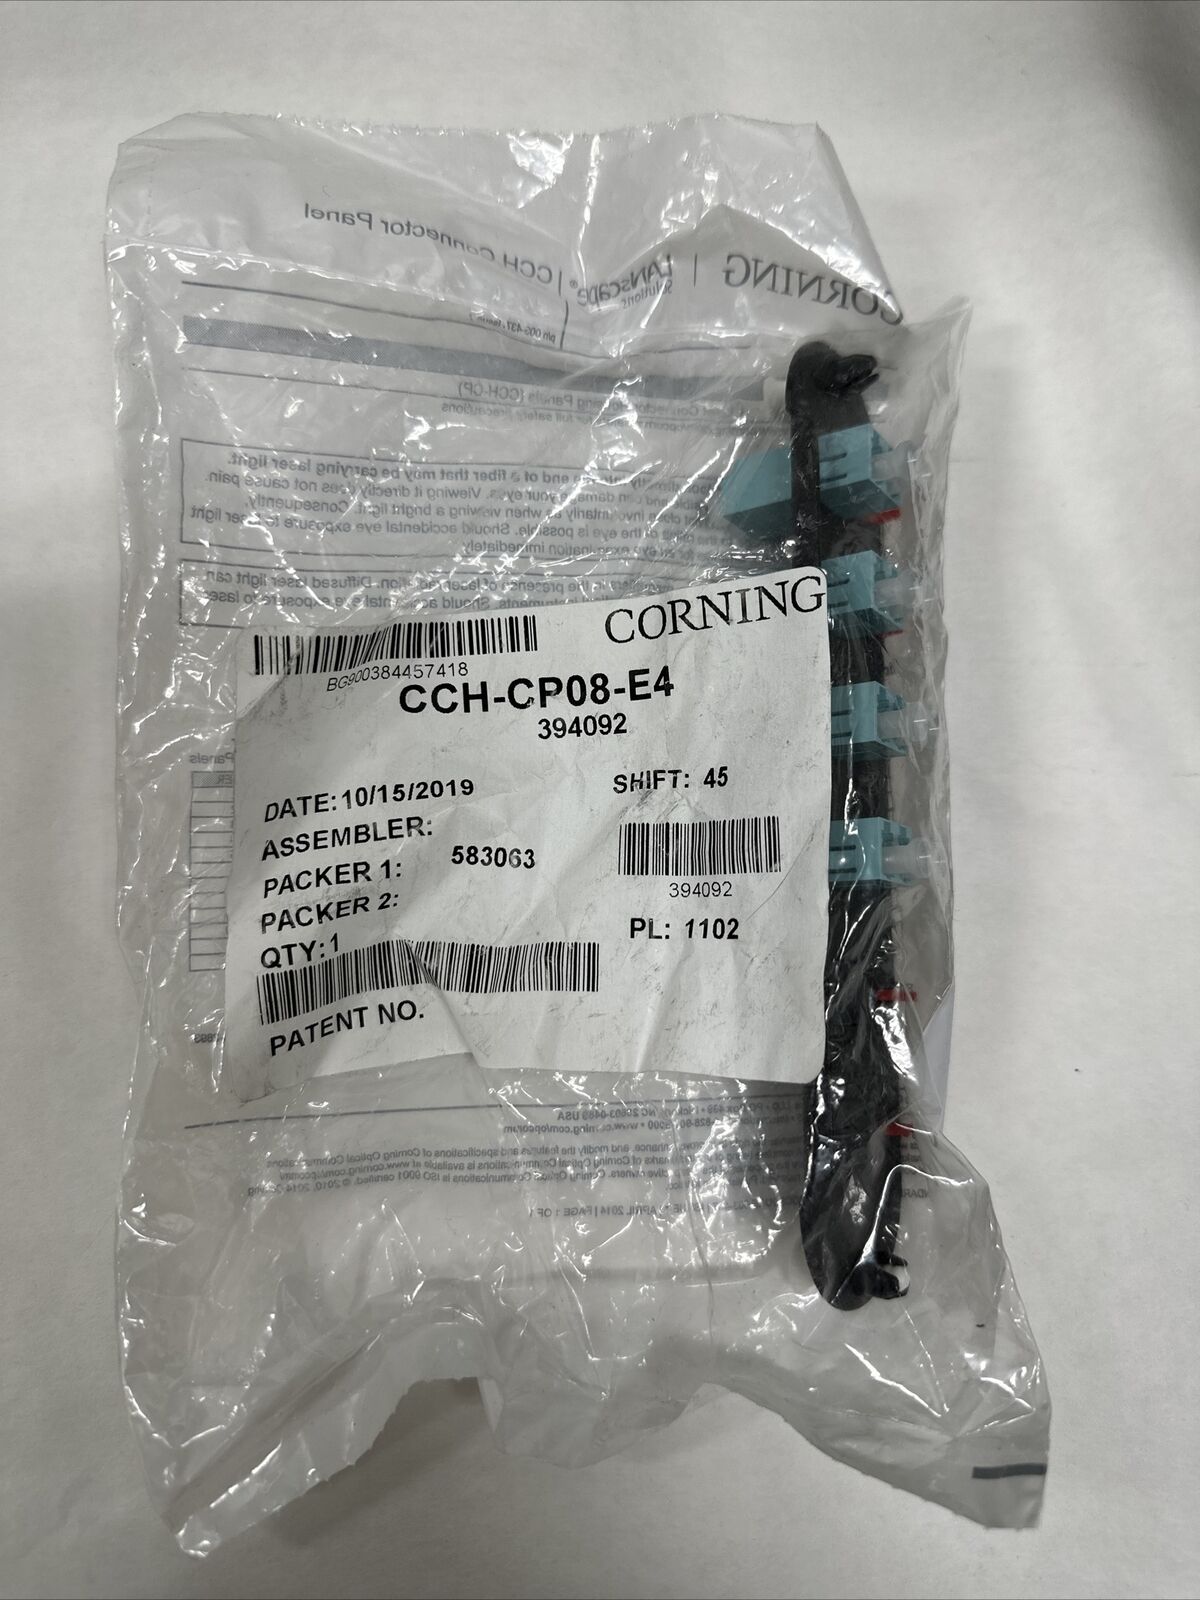 NEW CORNING CCH-CP08-E4 FIBER ADAPTER NEW SEALED SEE PHOTOS 